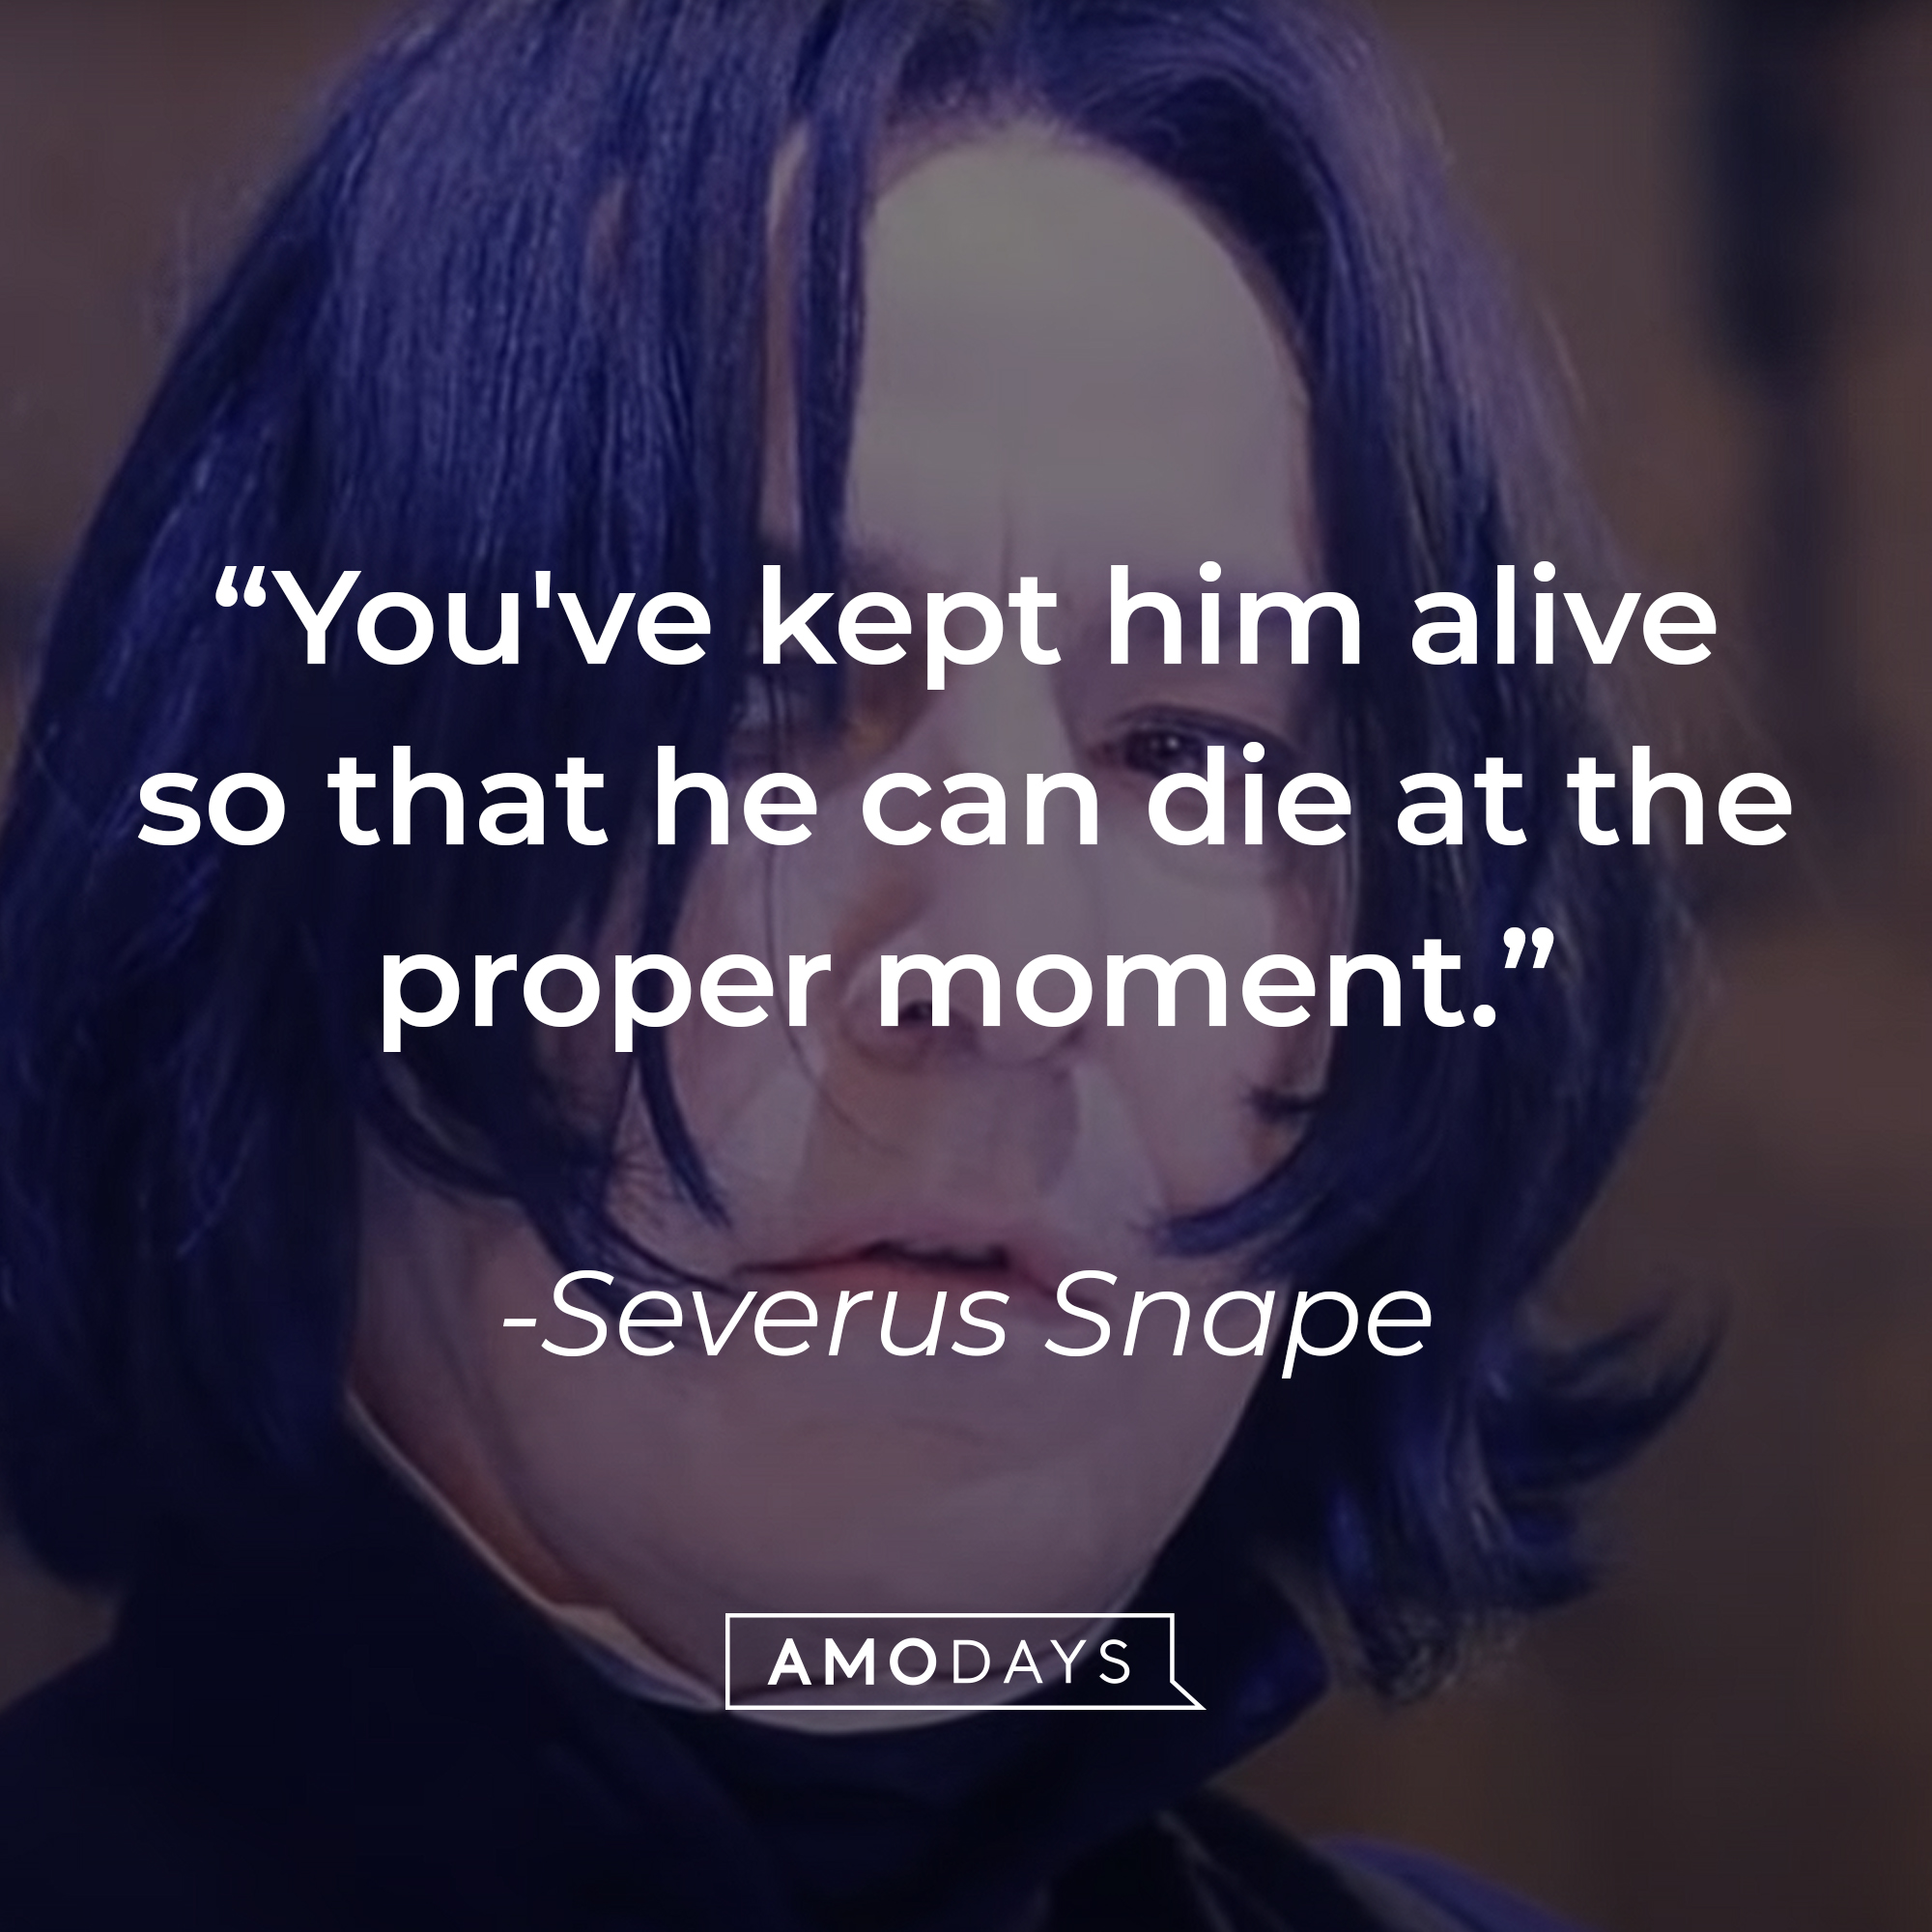 Severus Snape's quote: "You've kept him alive so that he can die at the proper moment." | Source: YouTube/harrypotter